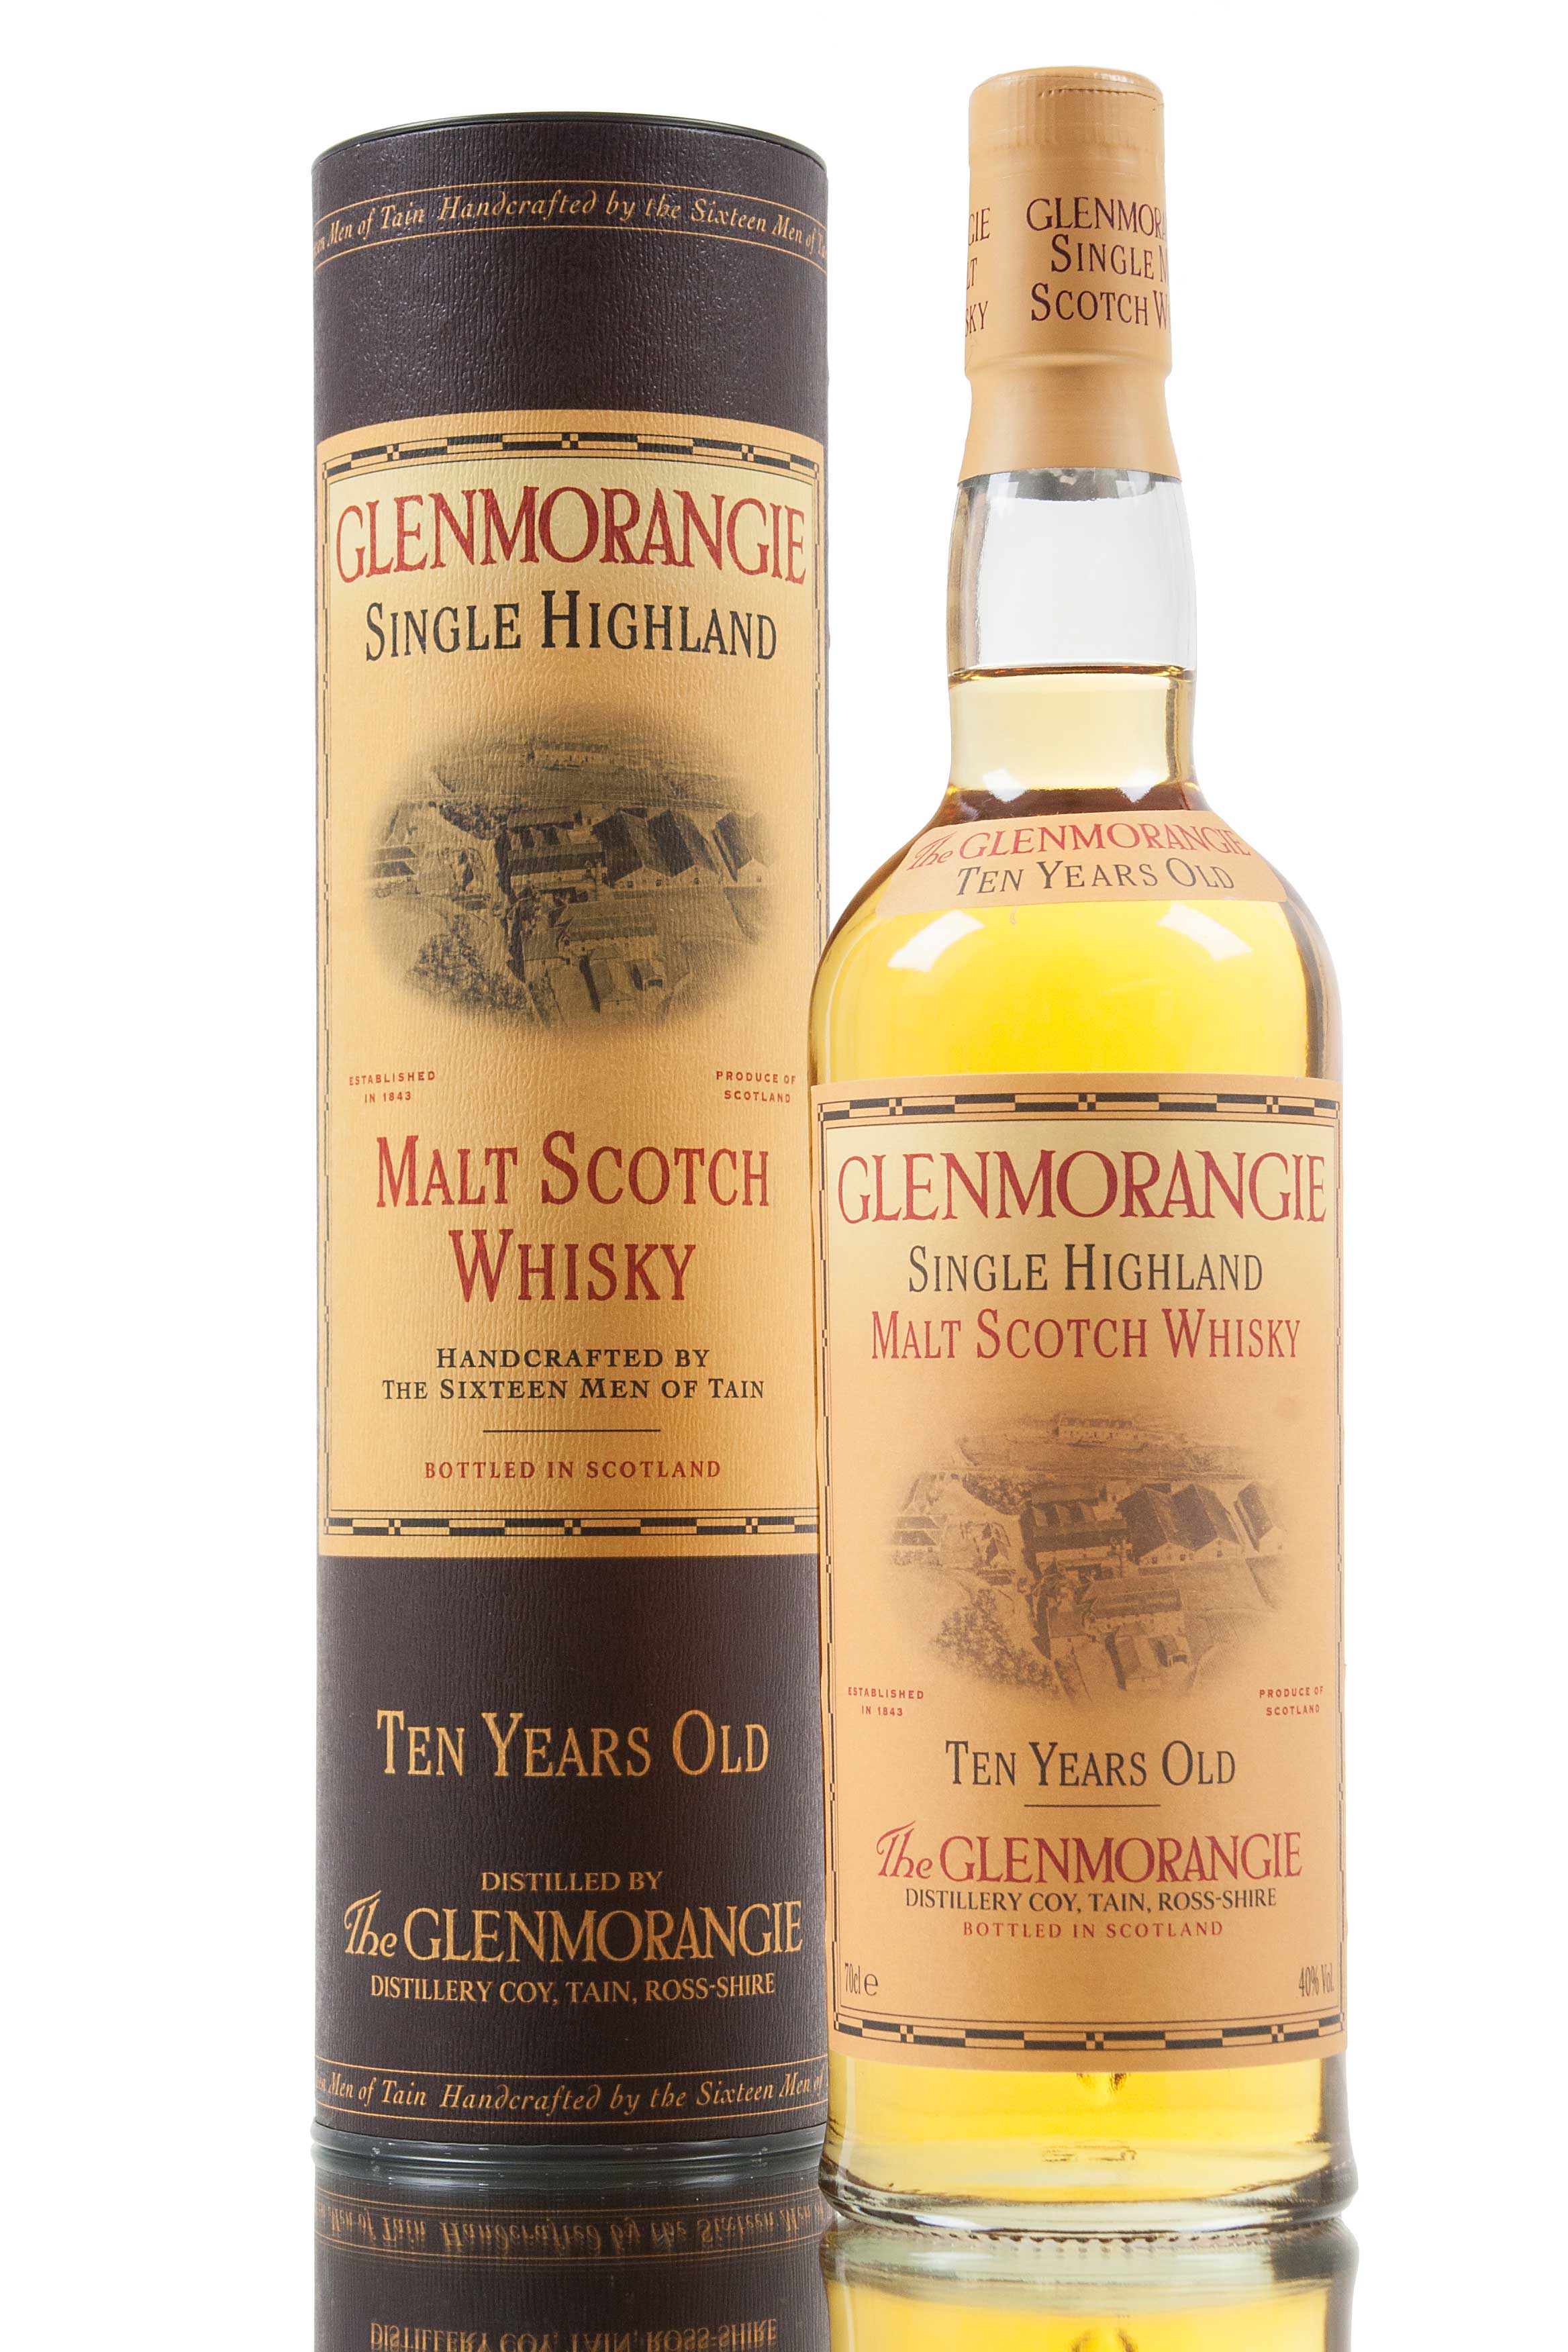 Glenmorangie Hand Signed By The Sixteen Men Of Tain